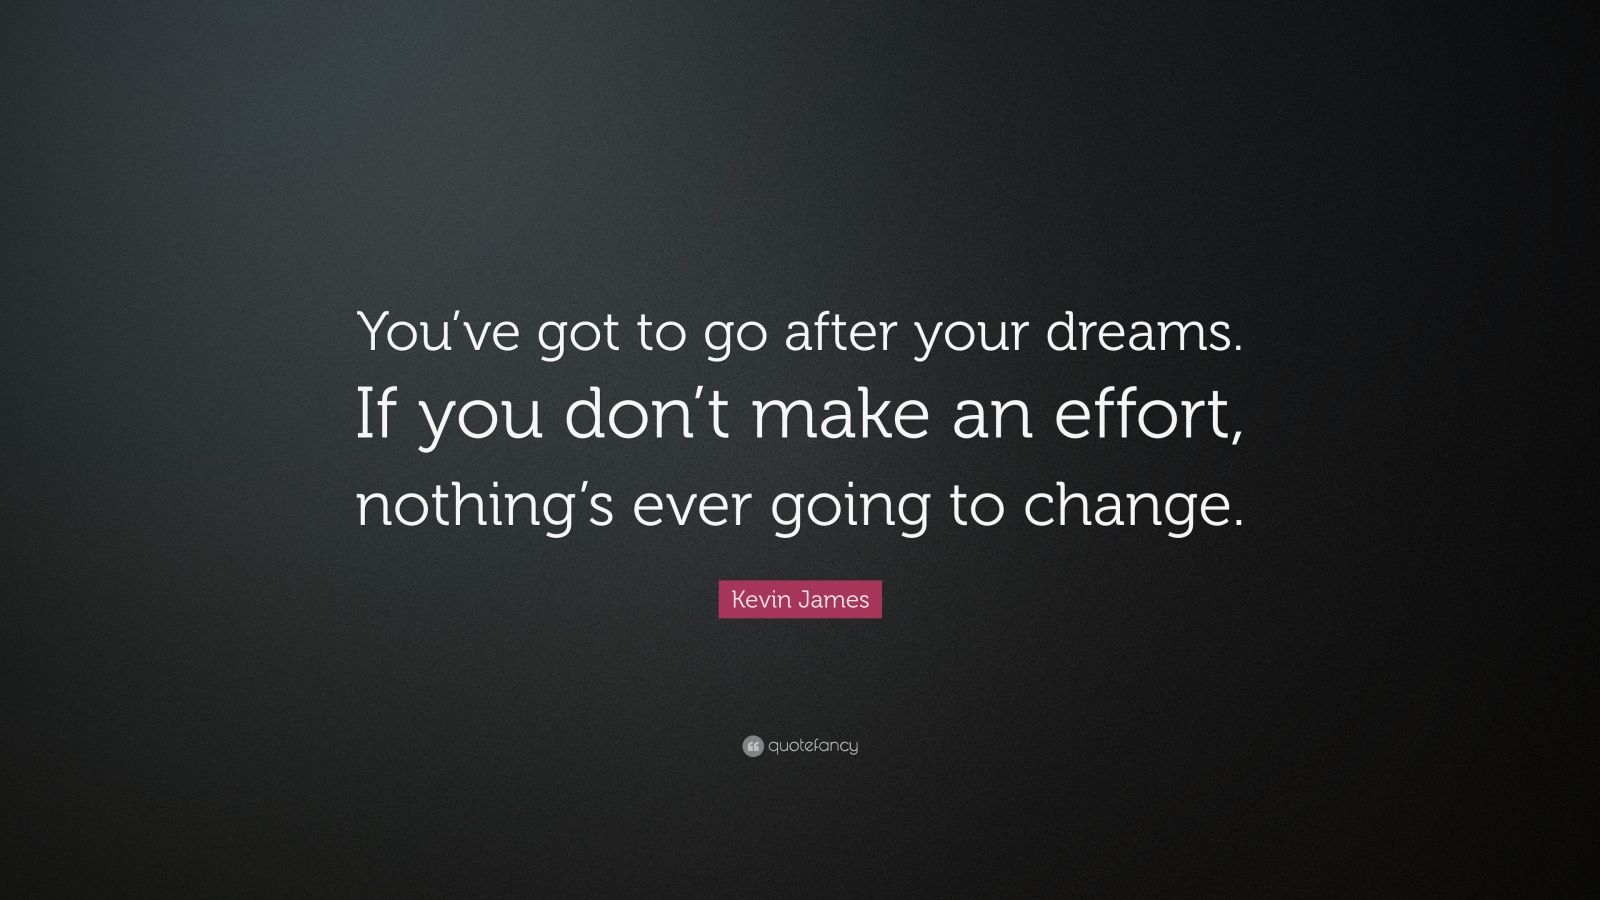 Kevin James Quote: “You’ve got to go after your dreams. If you don’t ...